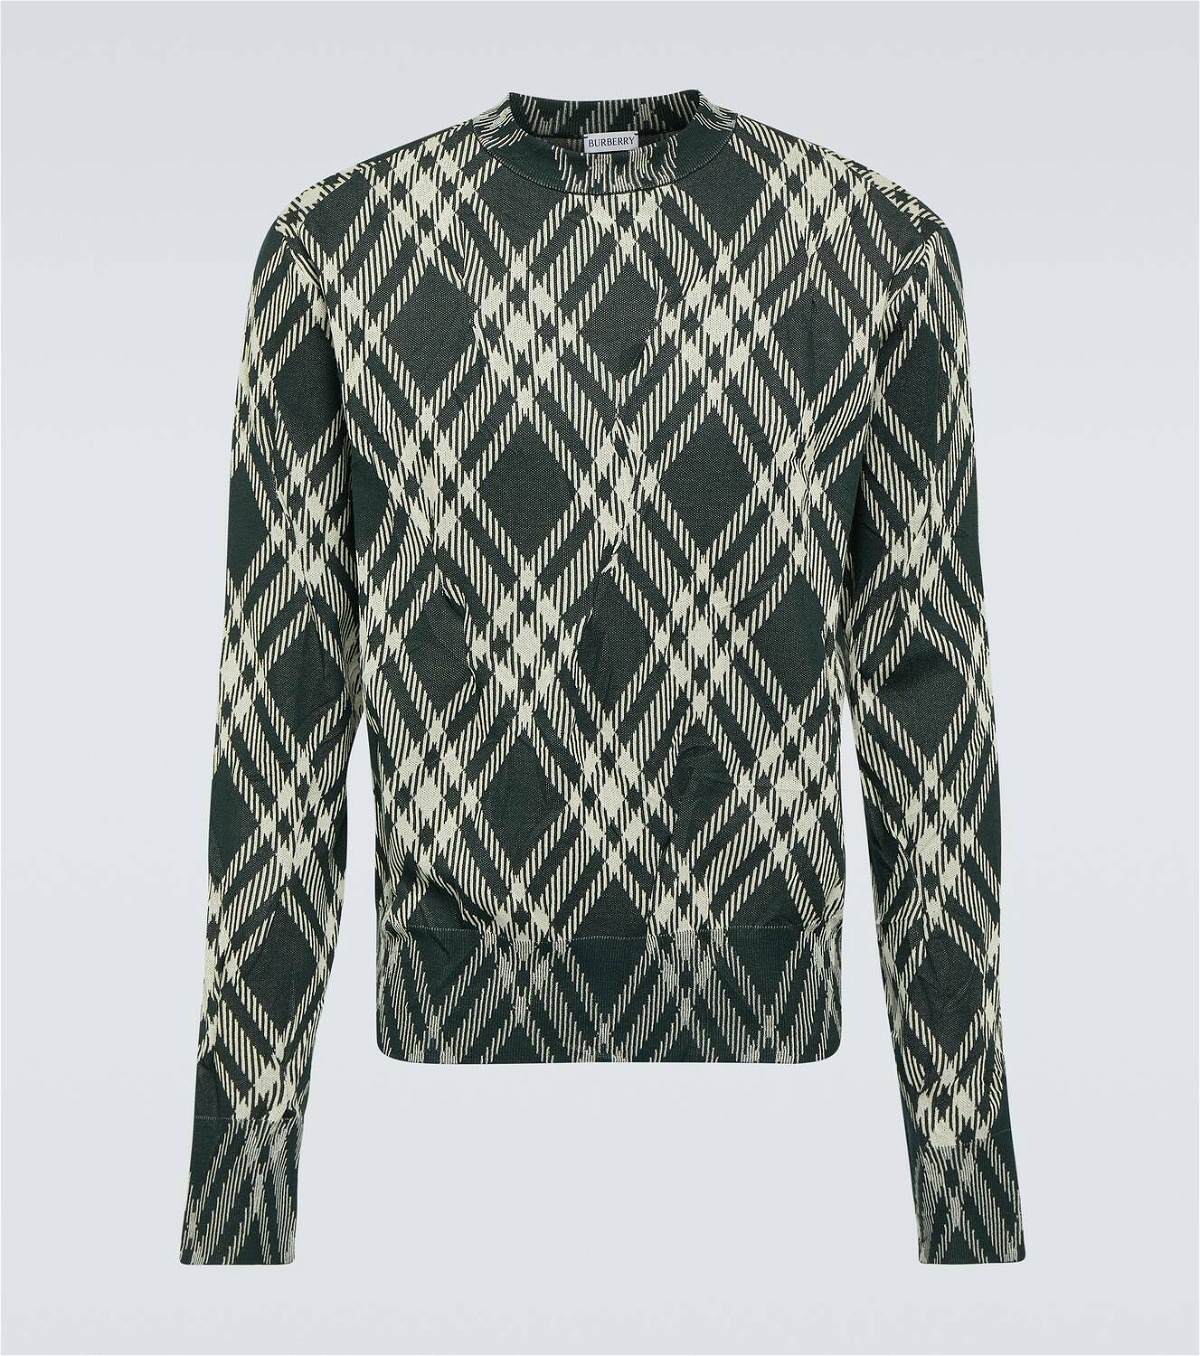 Burberry Checked cotton-blend sweater